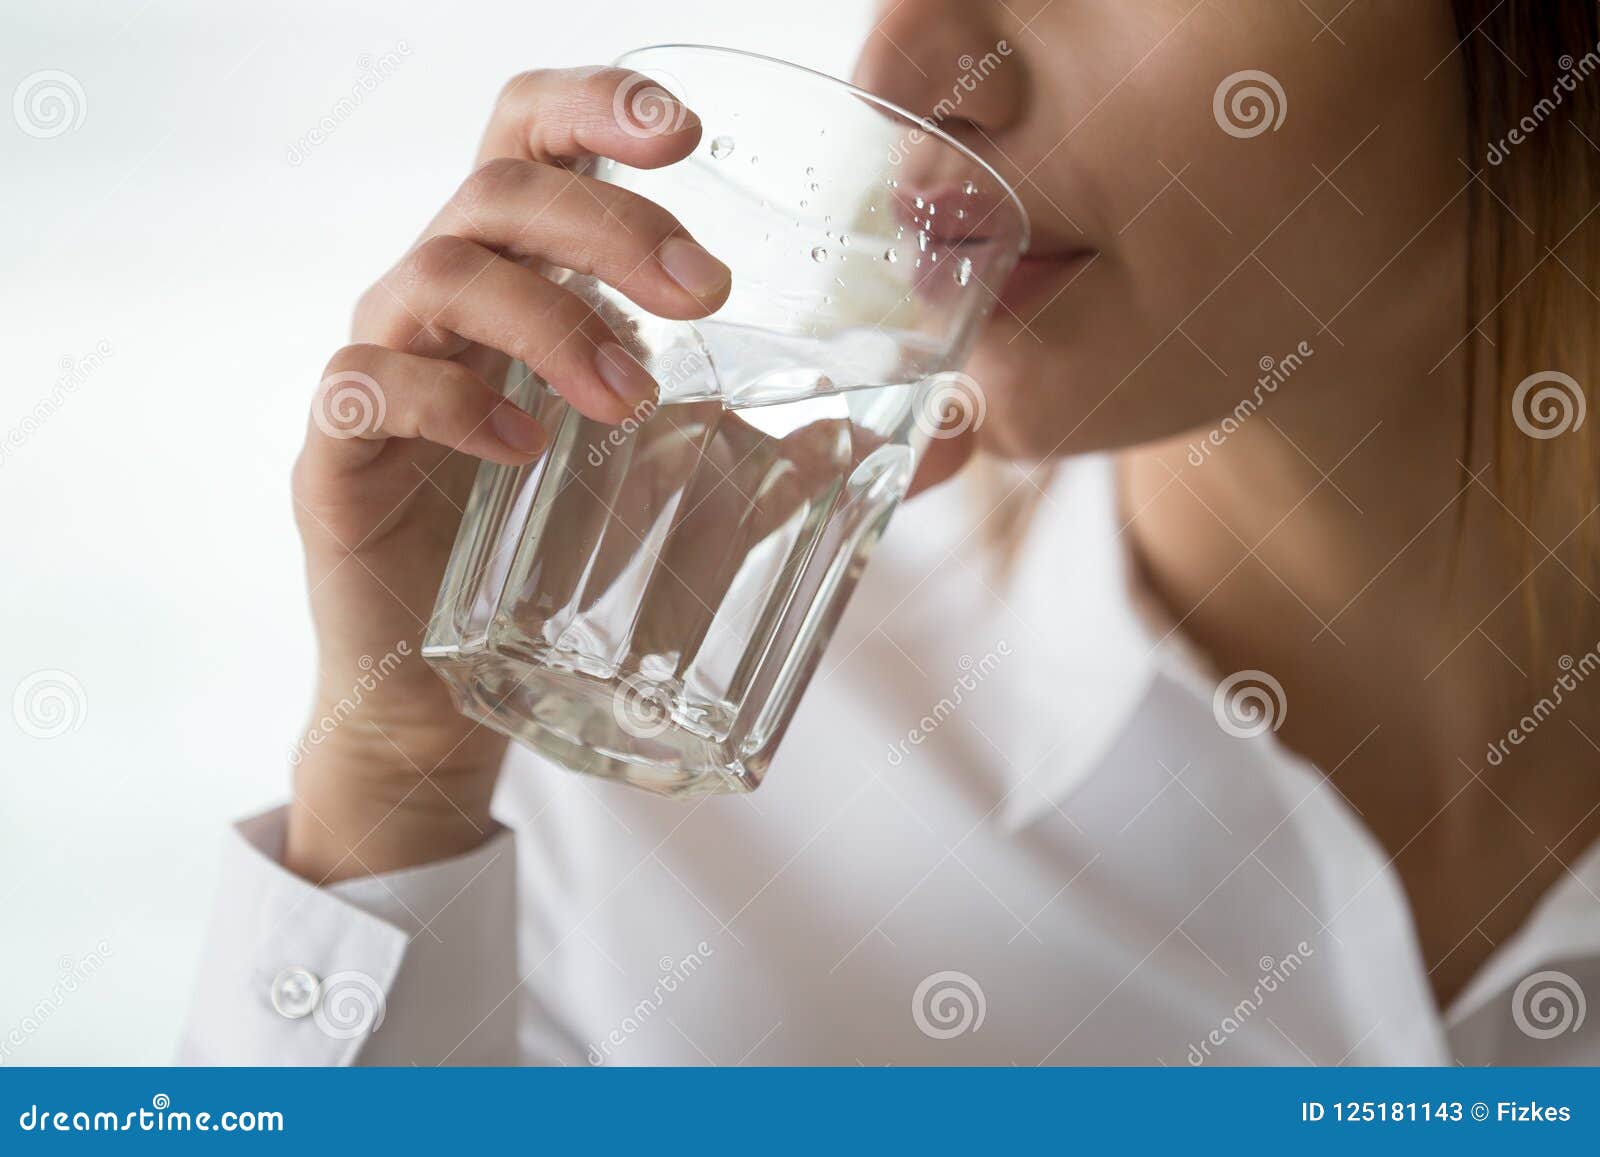 dehydrated woman feeling thirsty holding glass drinking water, h